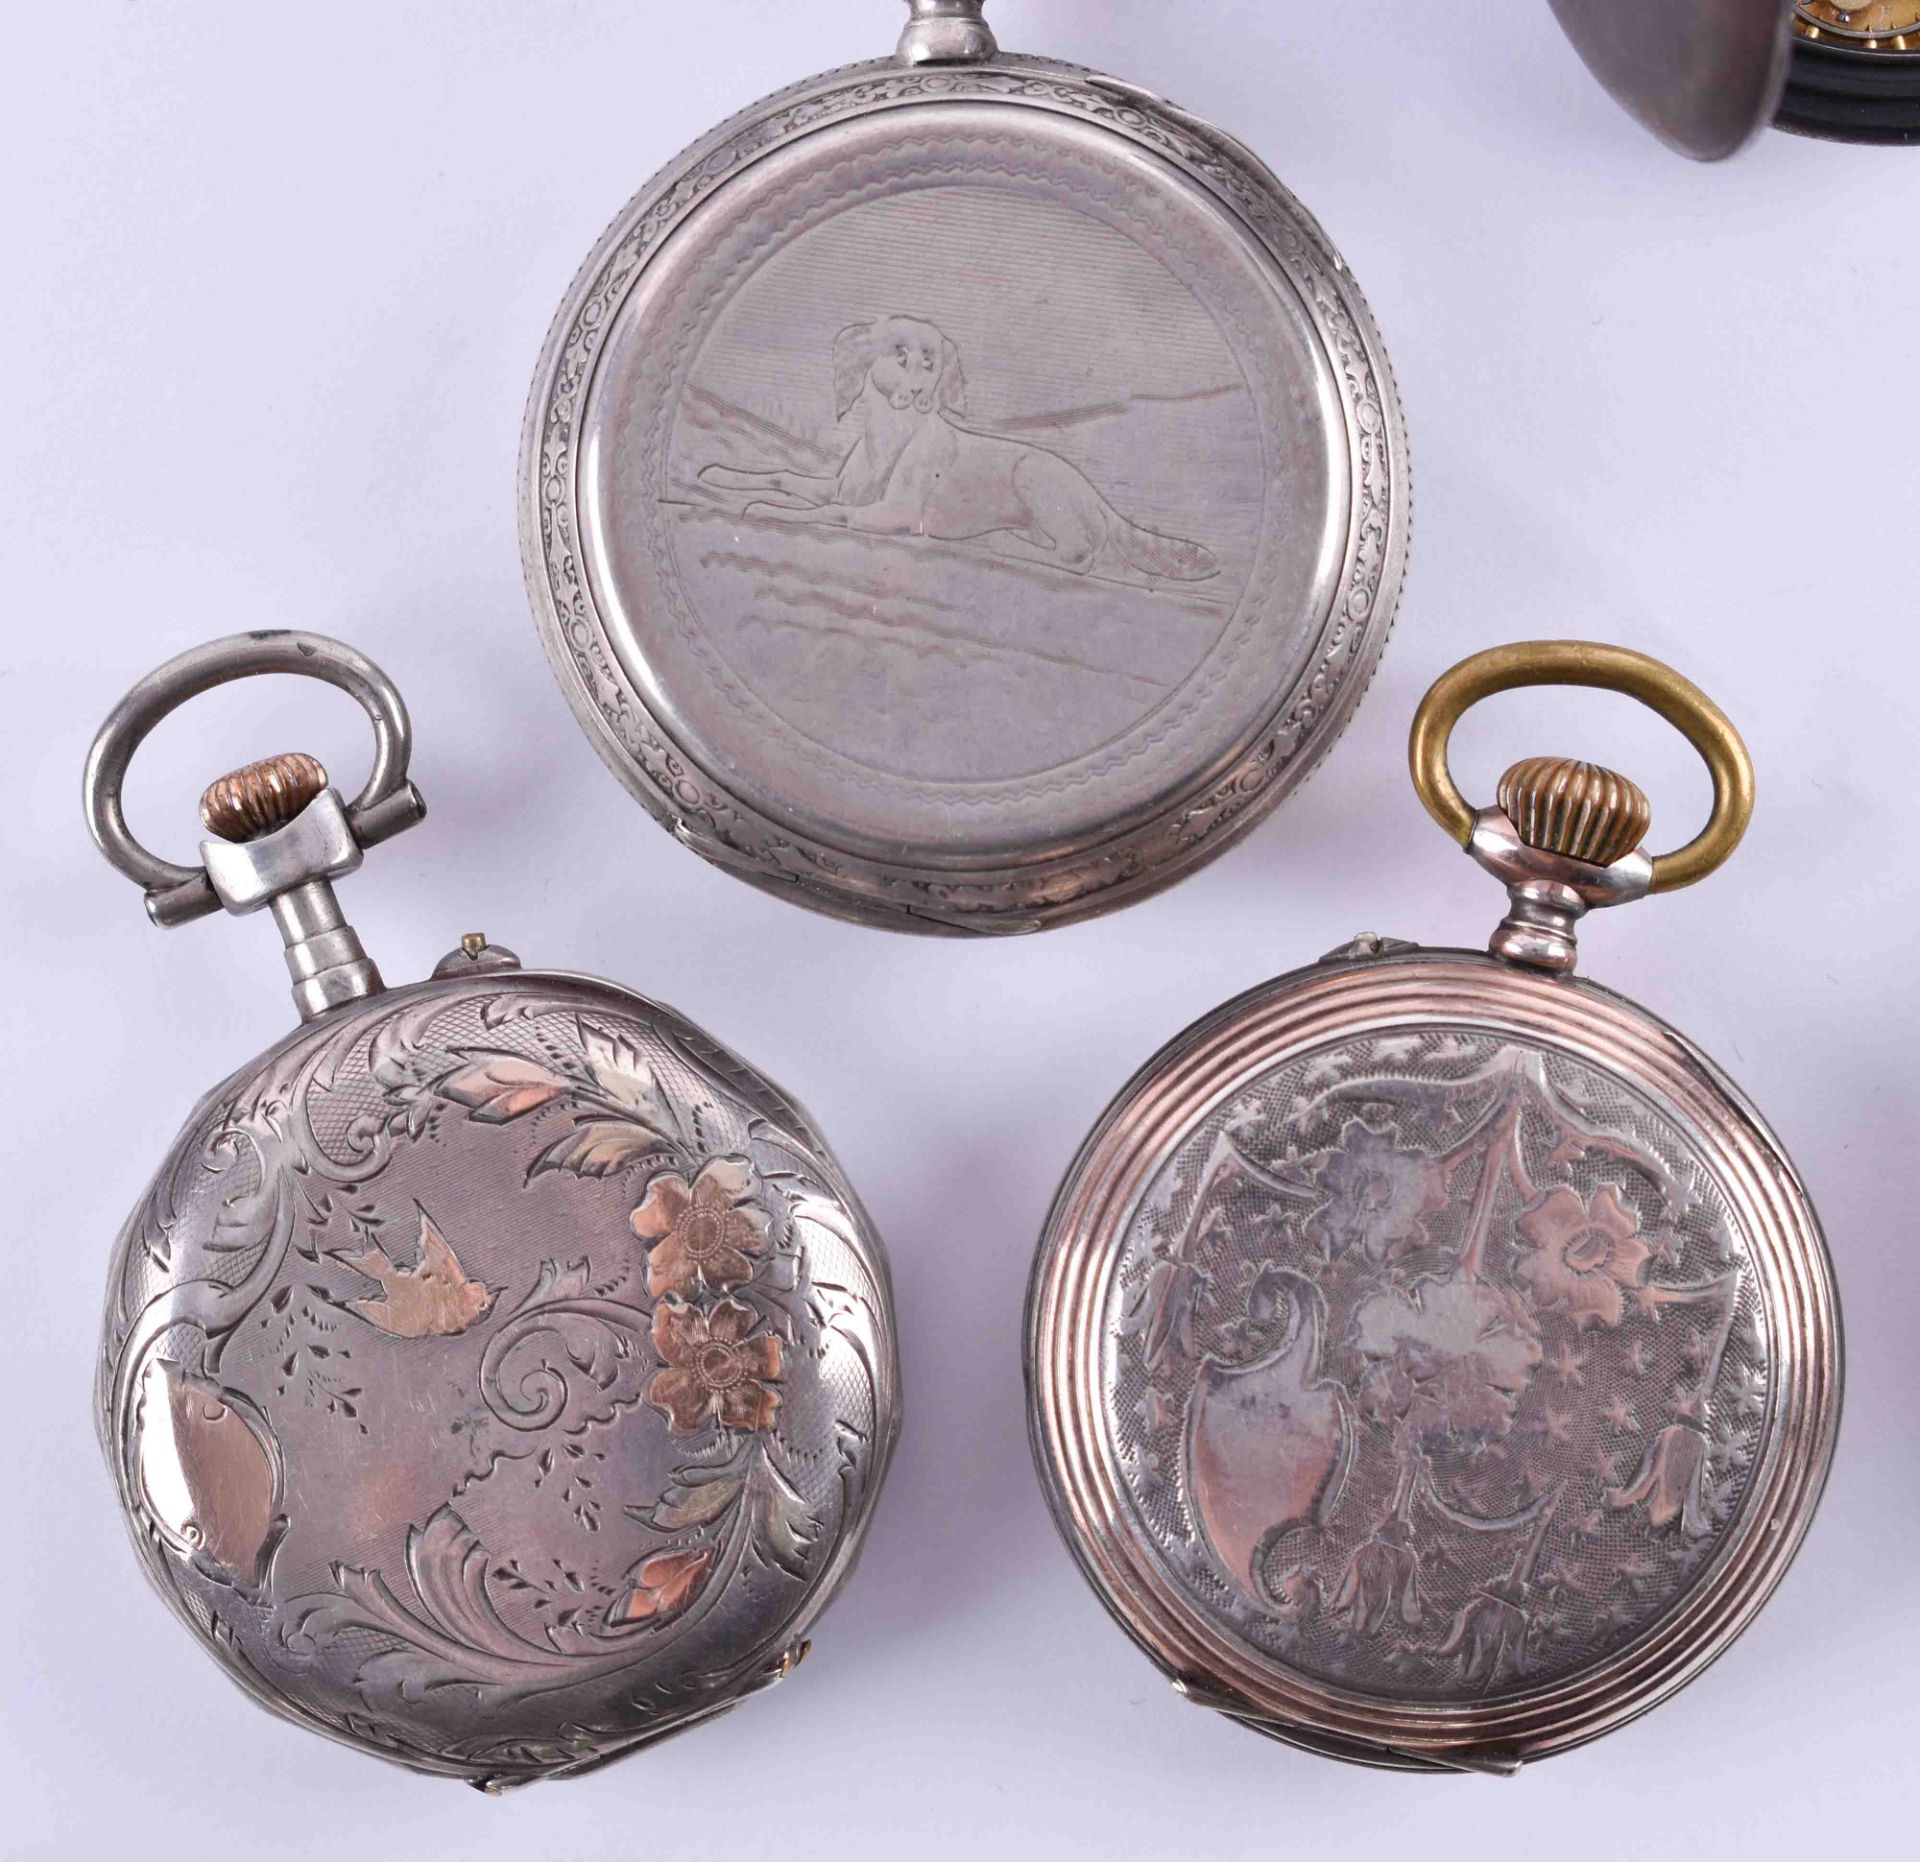 A group of 10 pocket watches5 x silver, mostly defective, 2-3 capsule watchesKonvolut 10 - Bild 6 aus 6